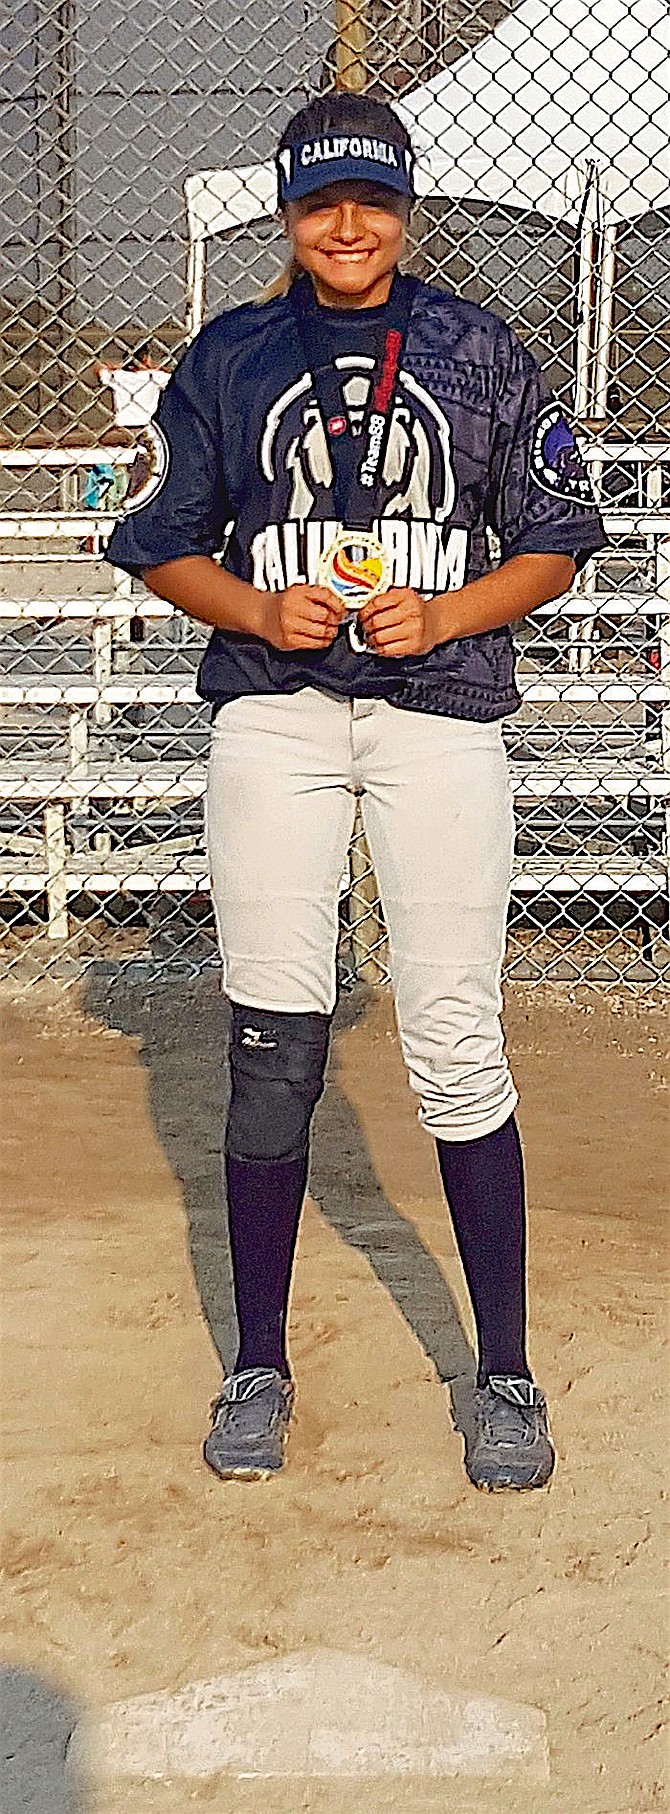 Taylynn Kizer (Washoe, Bishop Paiute tribes), who is heading into her sophomore year at Douglas High School, played for the gold medal-winning California softball team that won the 16U girls tournament July 21 at the North American Indigenous Games.